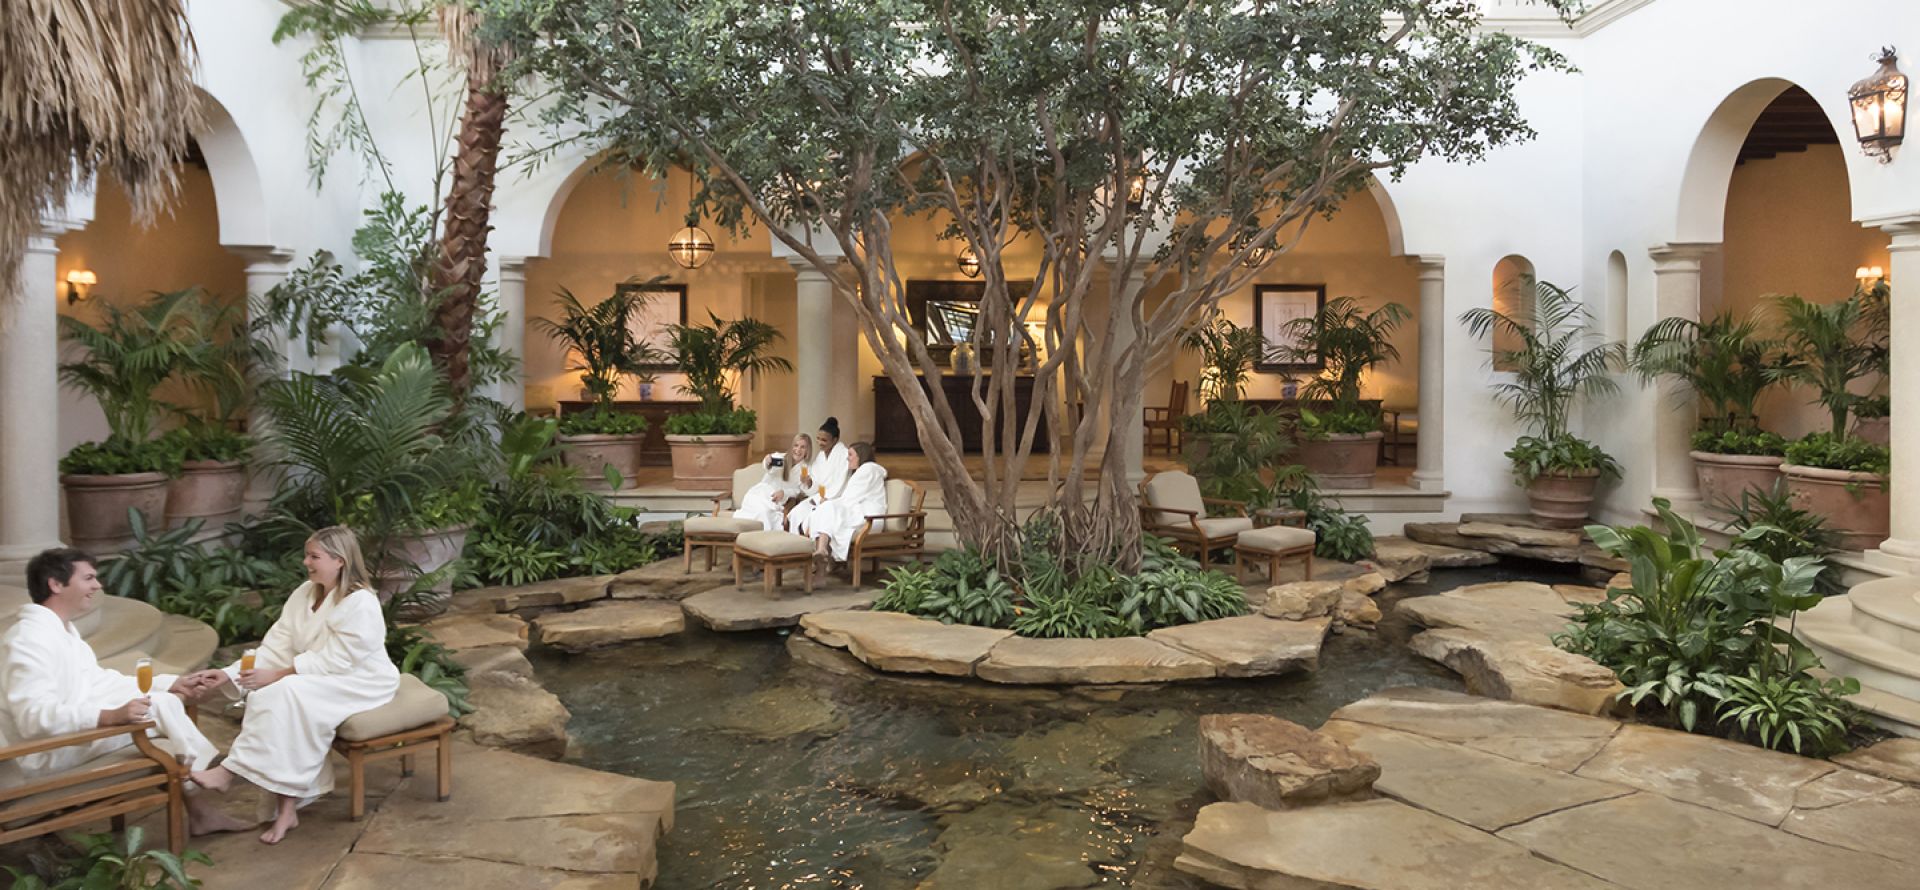 Guests seated at the Spa garden atrium in Sea Island Resort